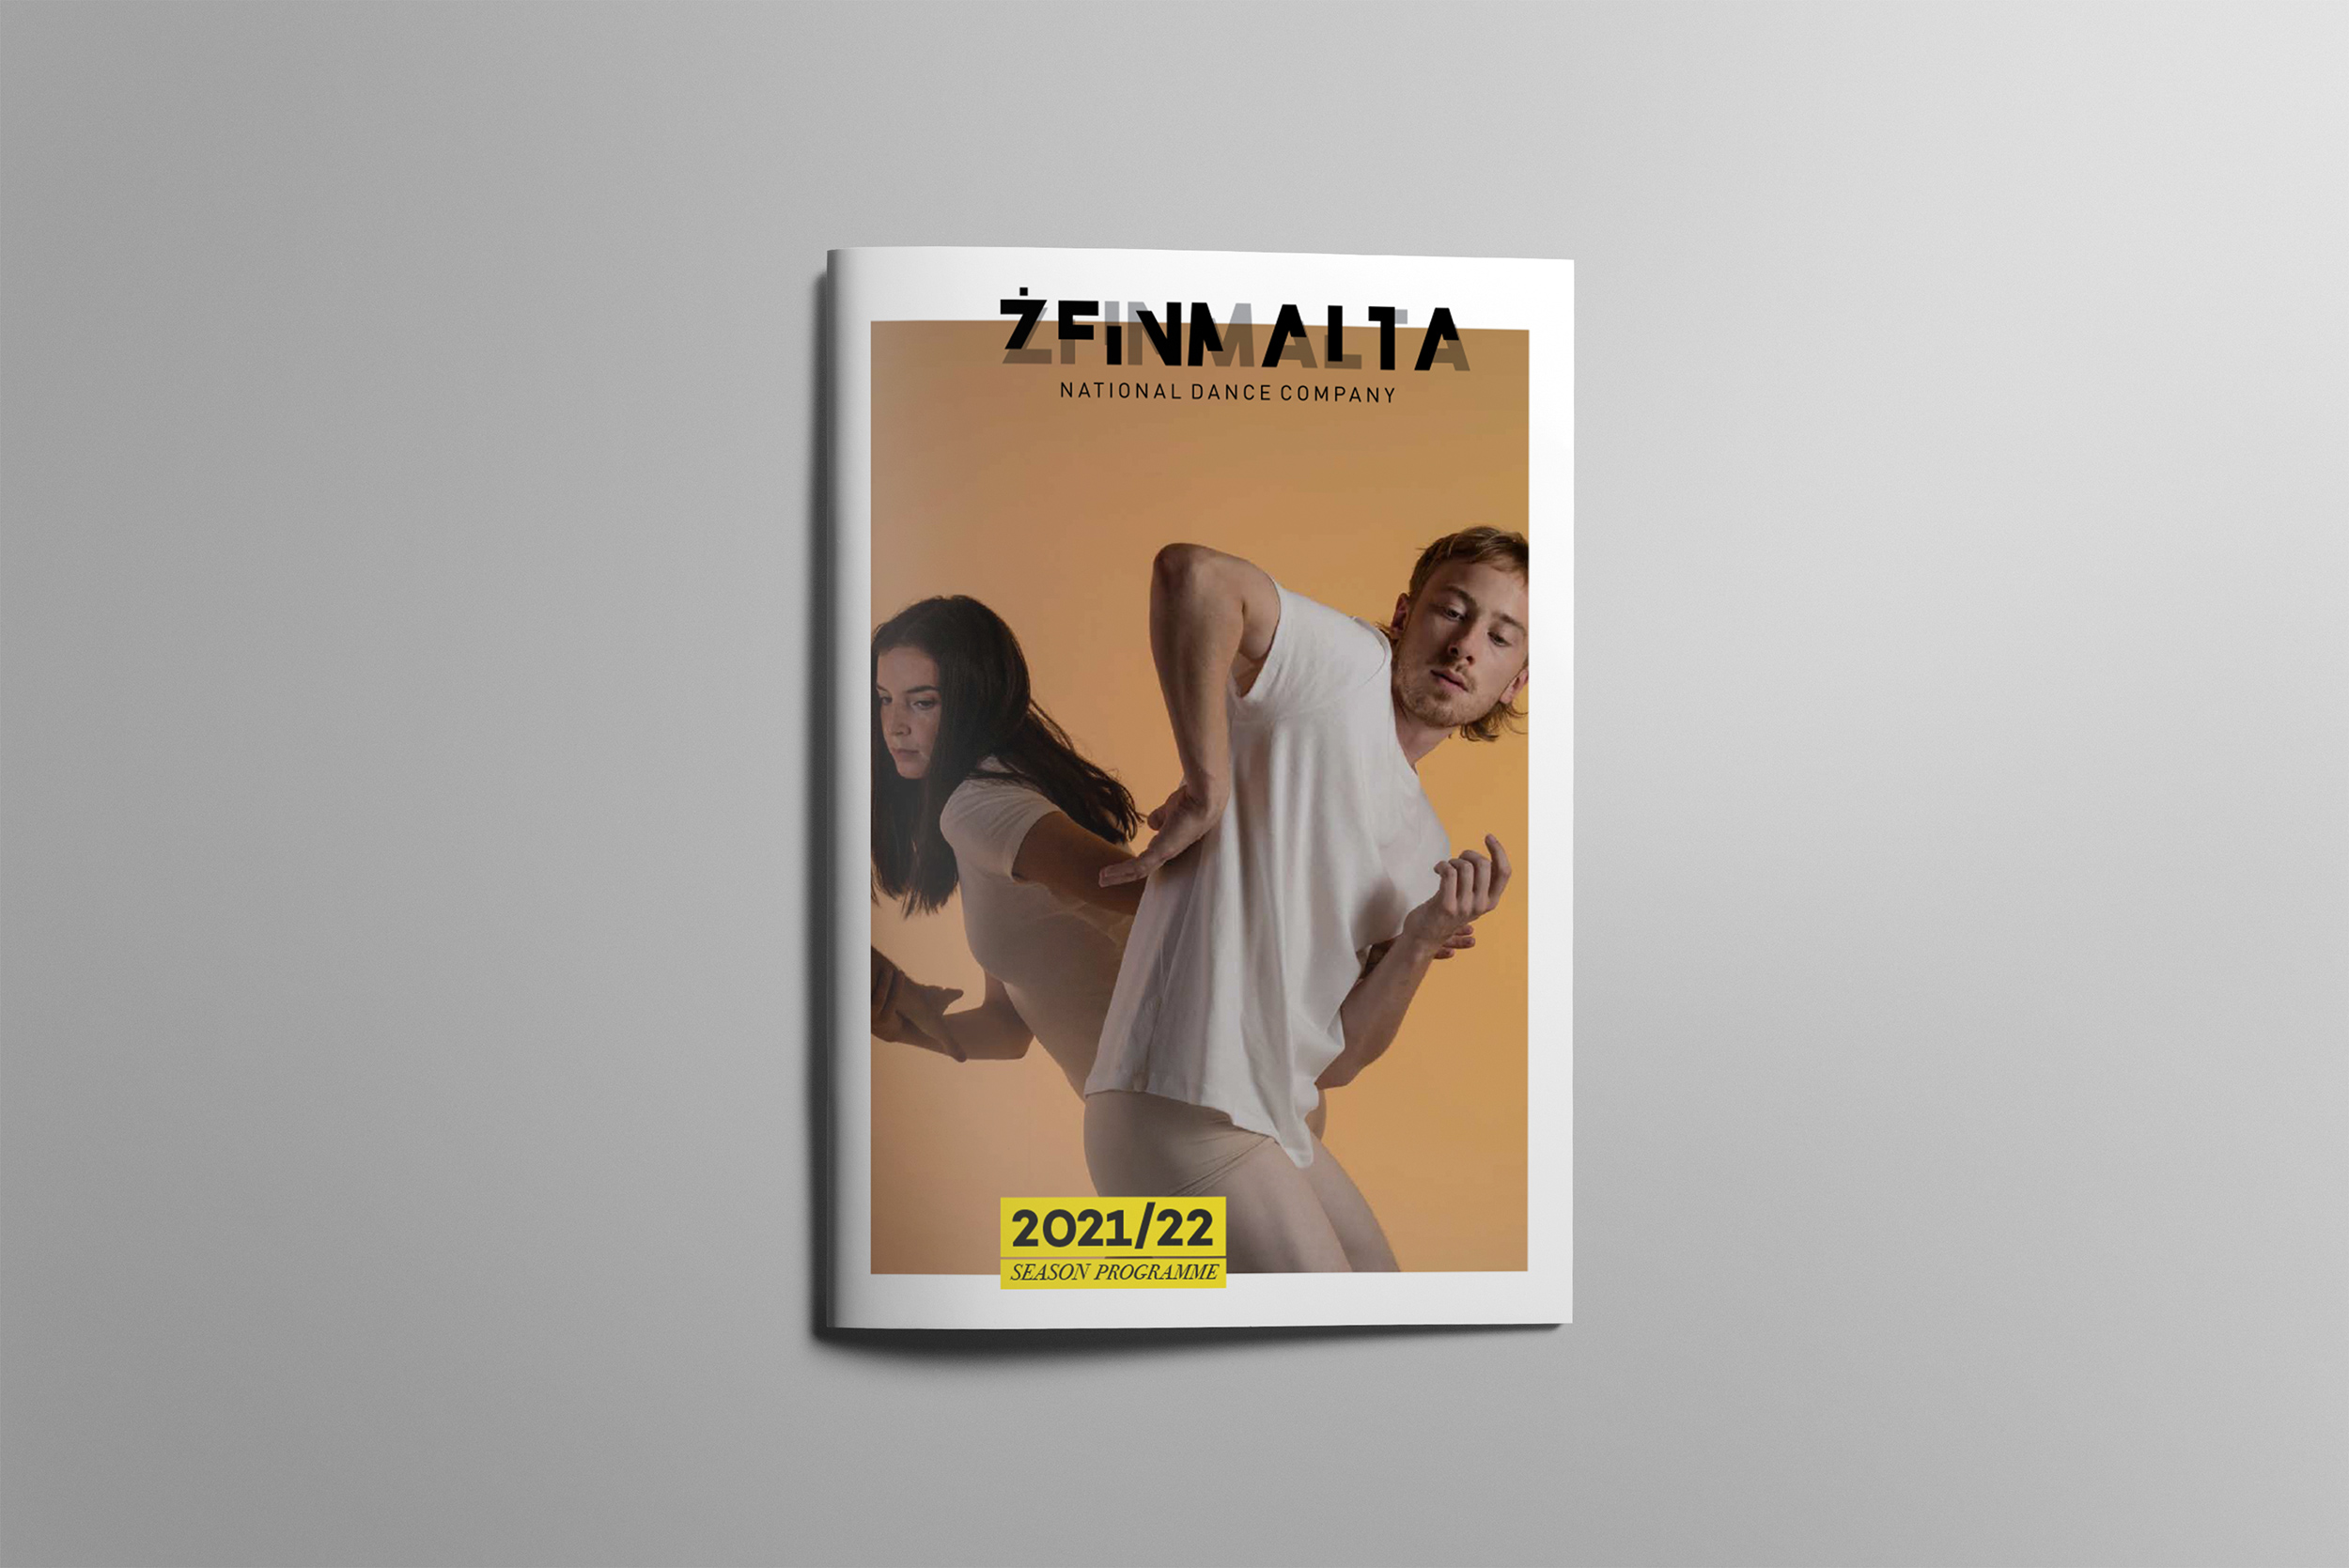 Photography by Alexandra Pace for ZfinMalta 2021 2022 Season Programme